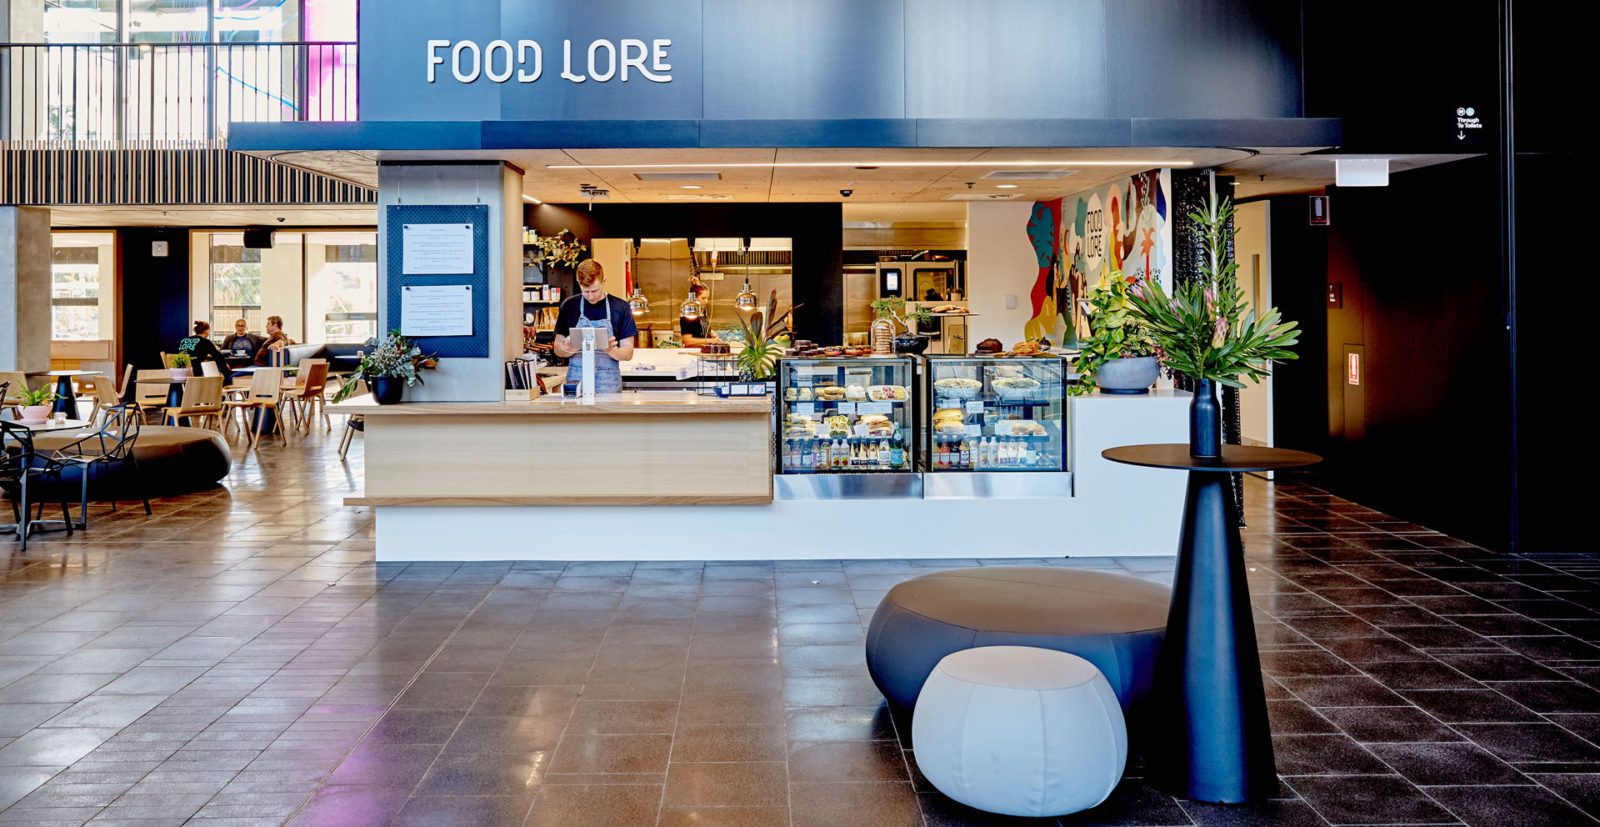 Food Lore café in the MOD. foyer - there is a staff member standing at the counter and fridges filled with cakes and sandwiches.